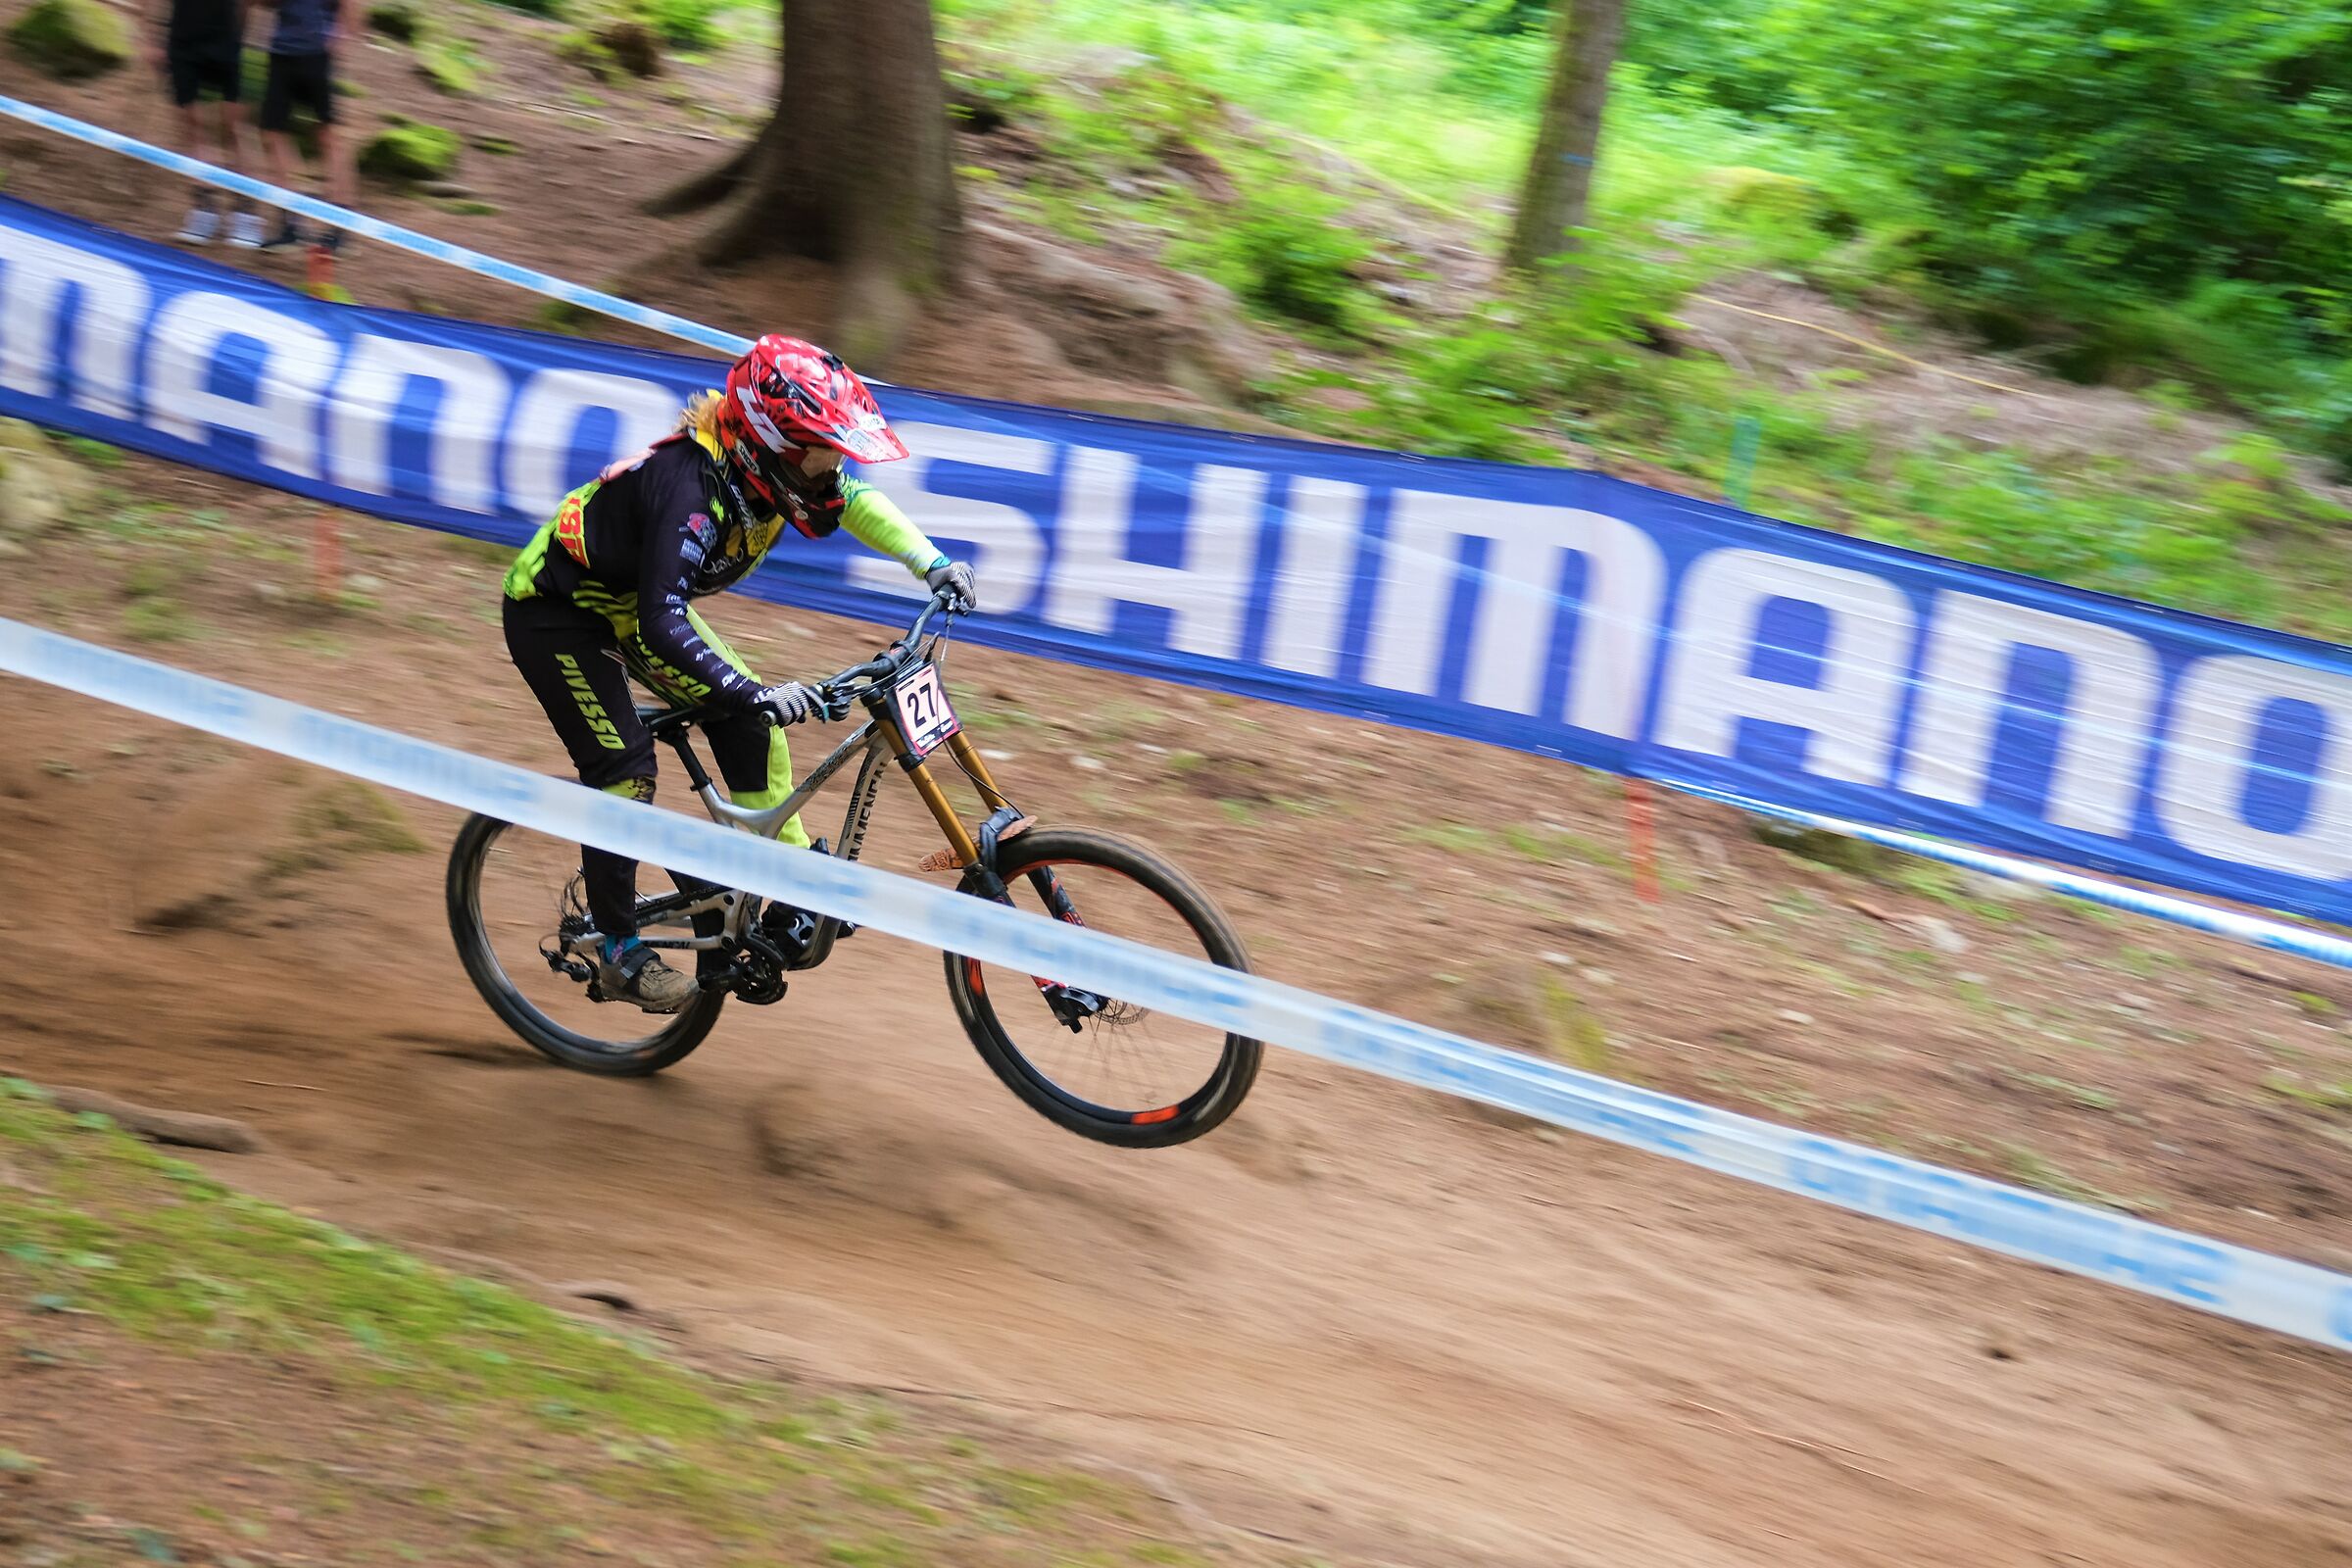 Downhill Val di Sole 2019 Panning...